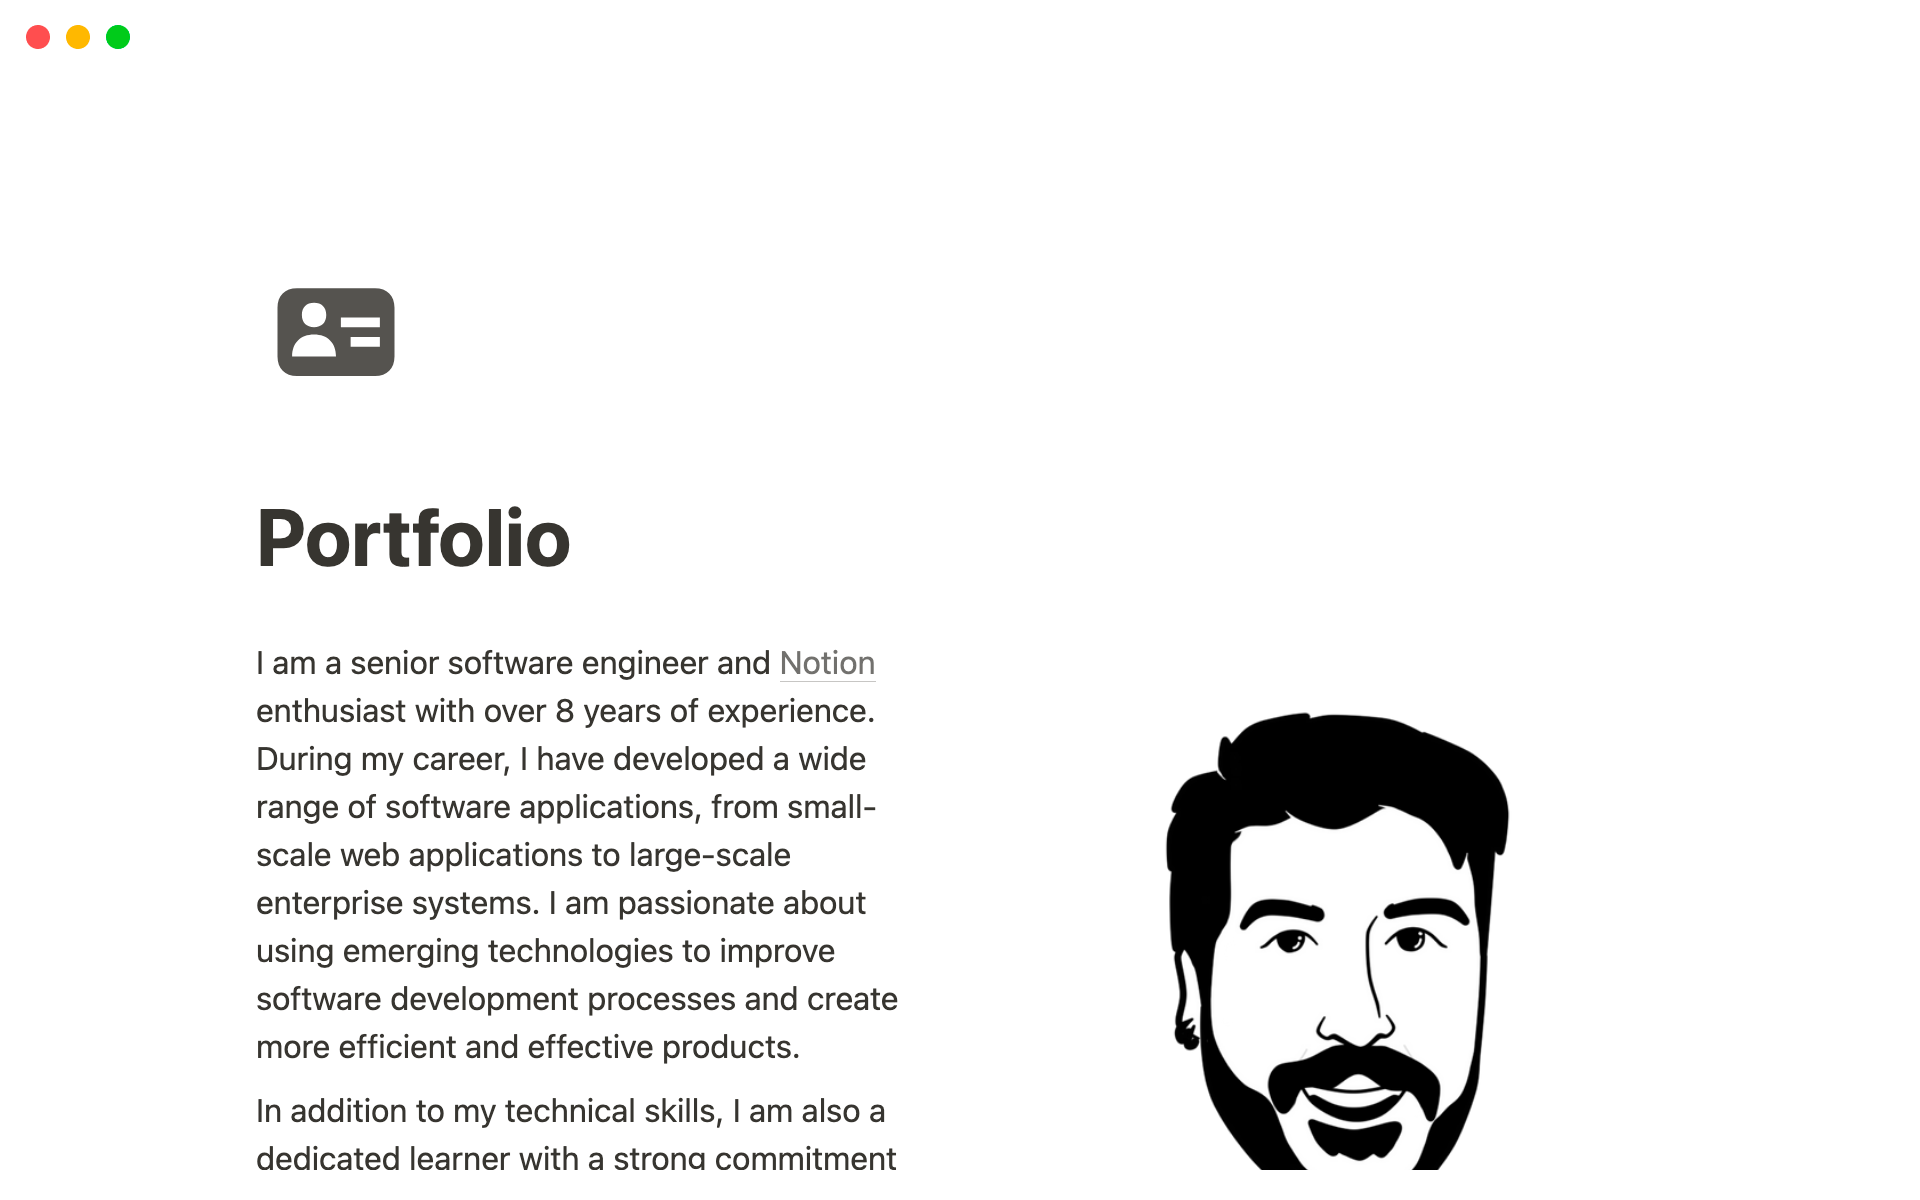 Notion's Portfolio Website Template helps individuals create a professional, SEO-optimized portfolio showcasing their skills and experience, complete with a contact form and visit analytics data.